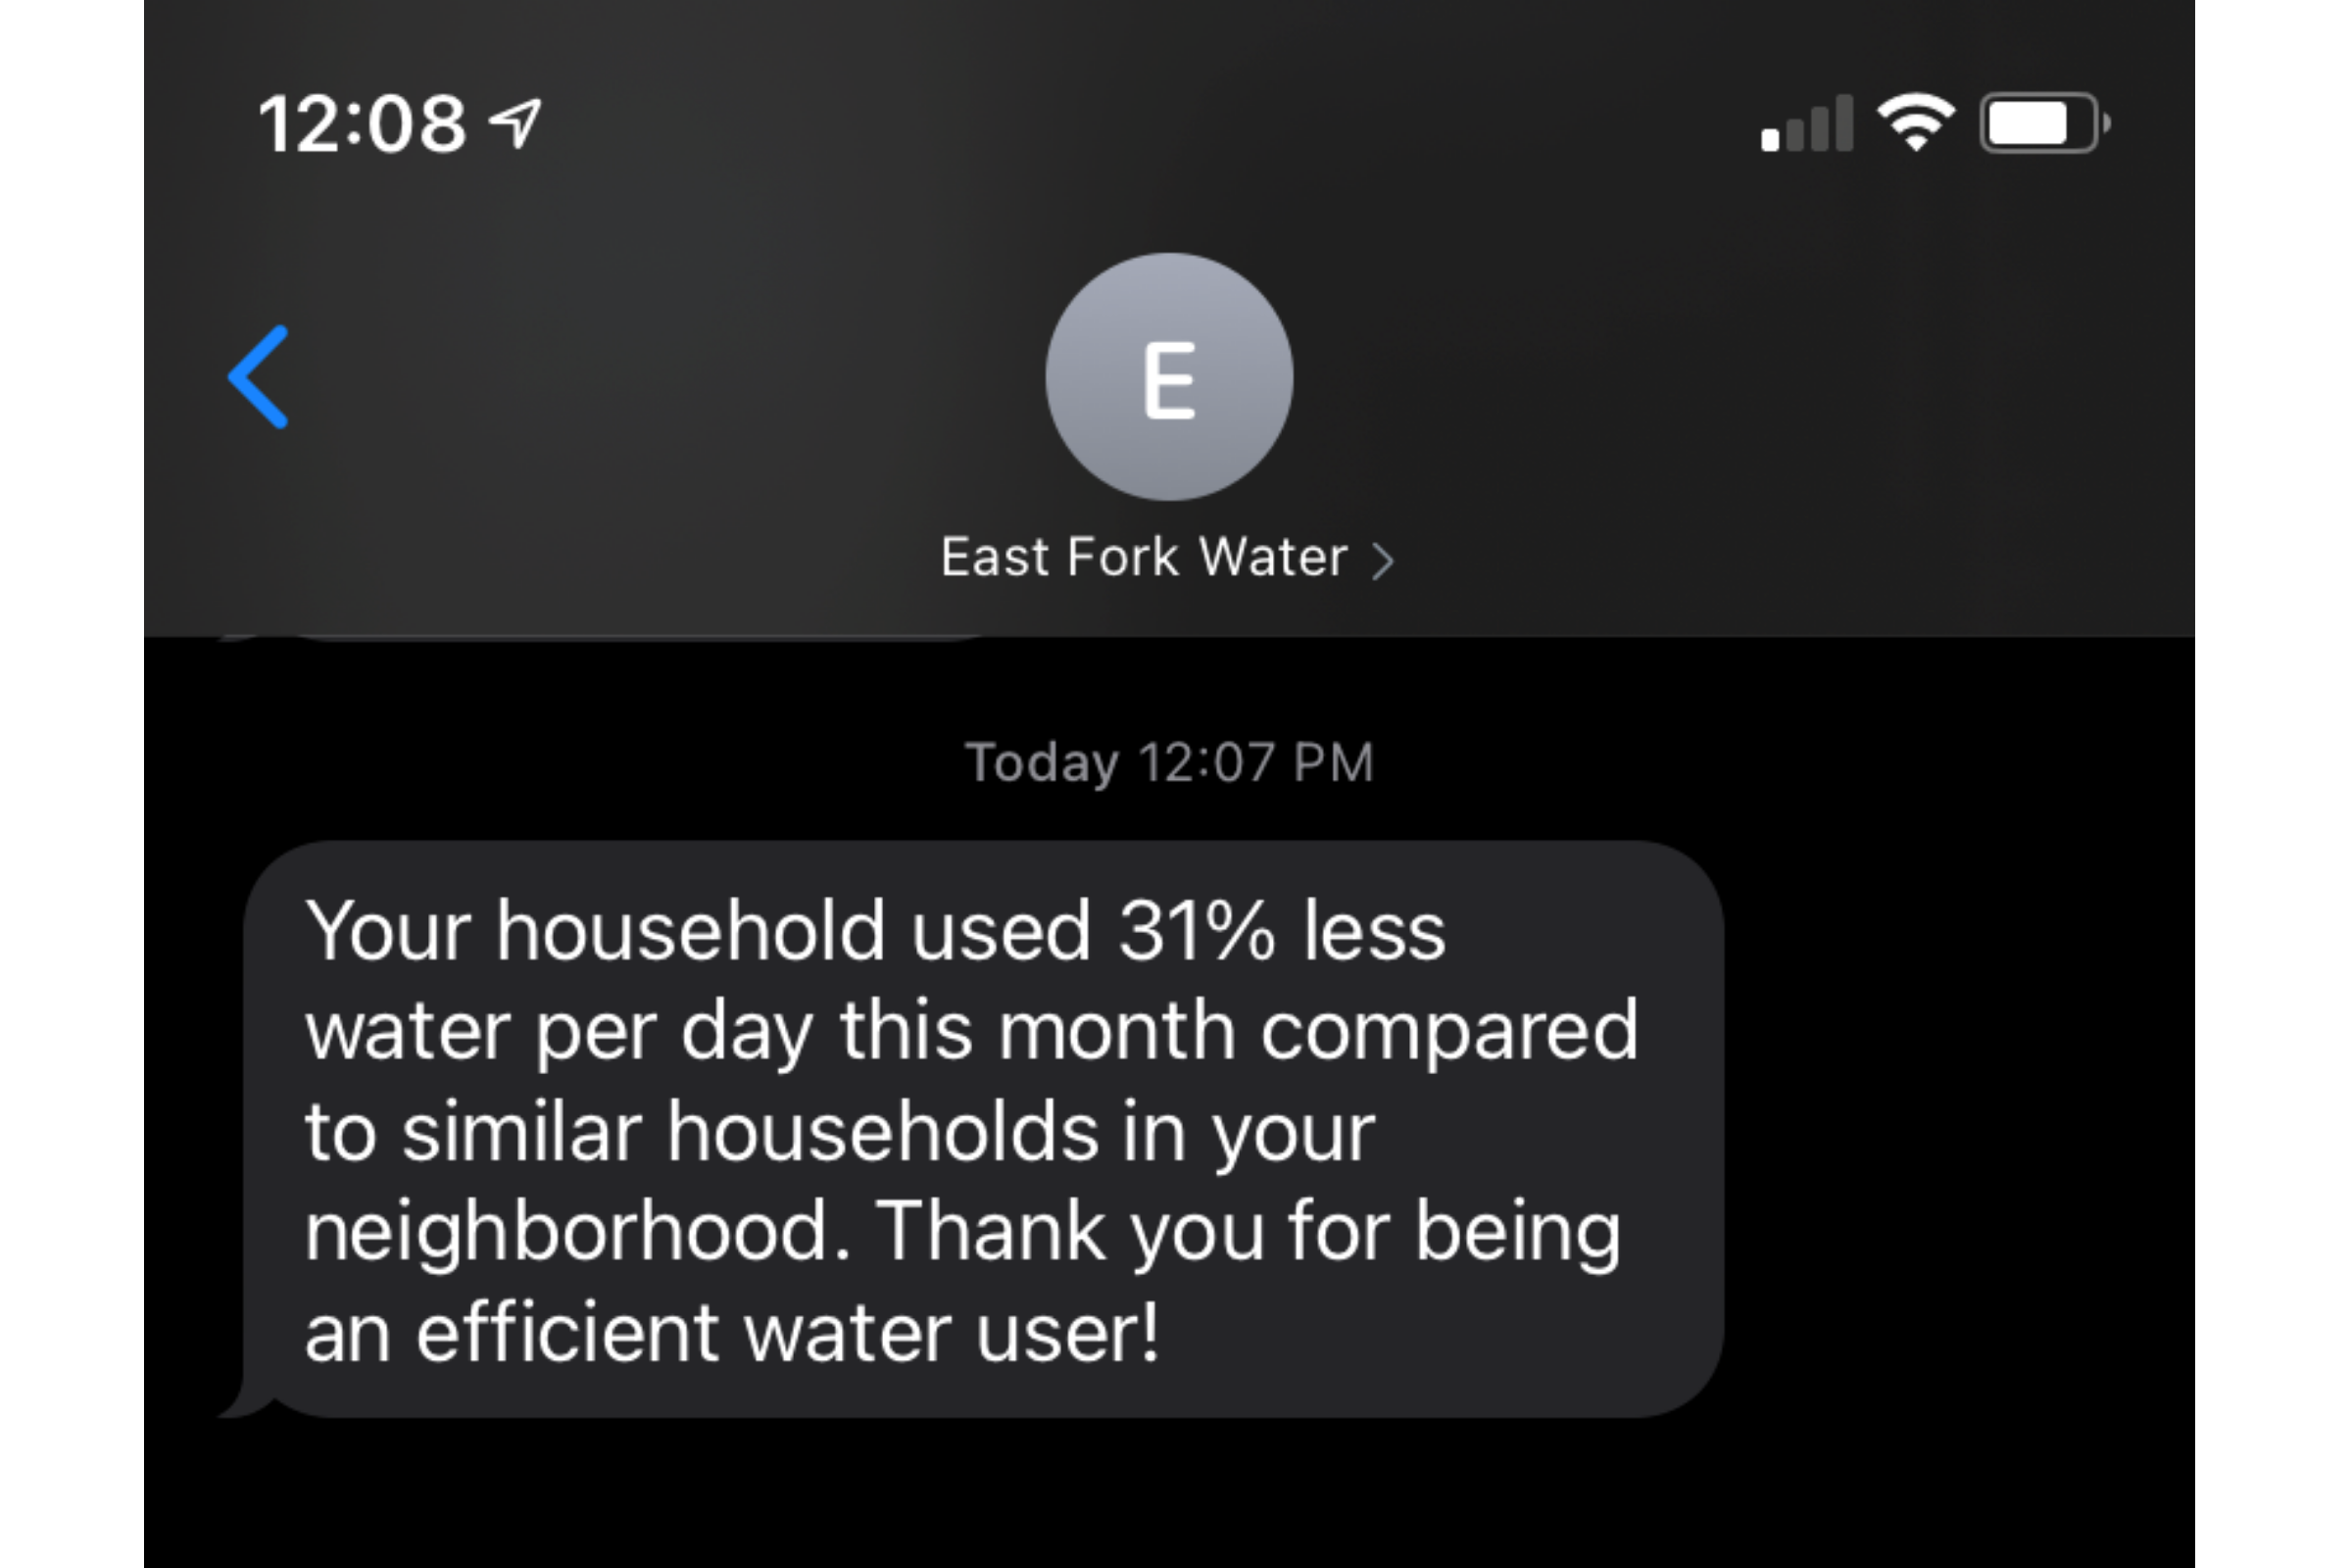 Water use data can drive text messaging